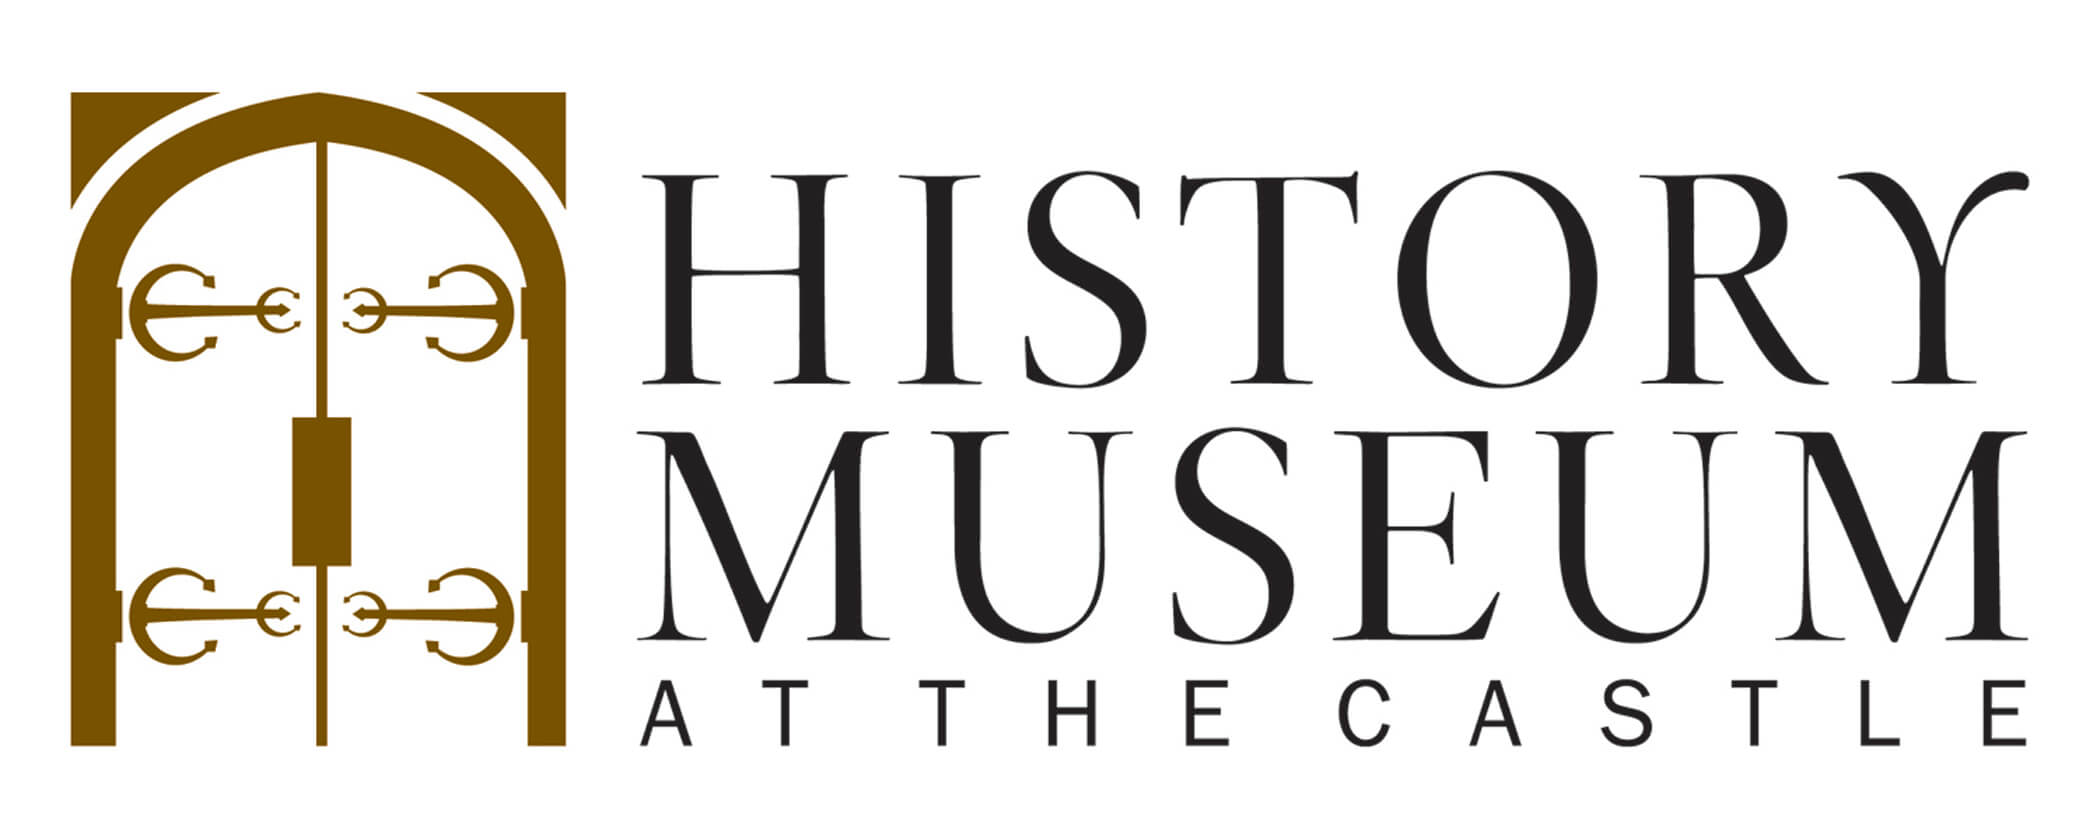 History Museum at the Castle logo in with brown doors and black text.